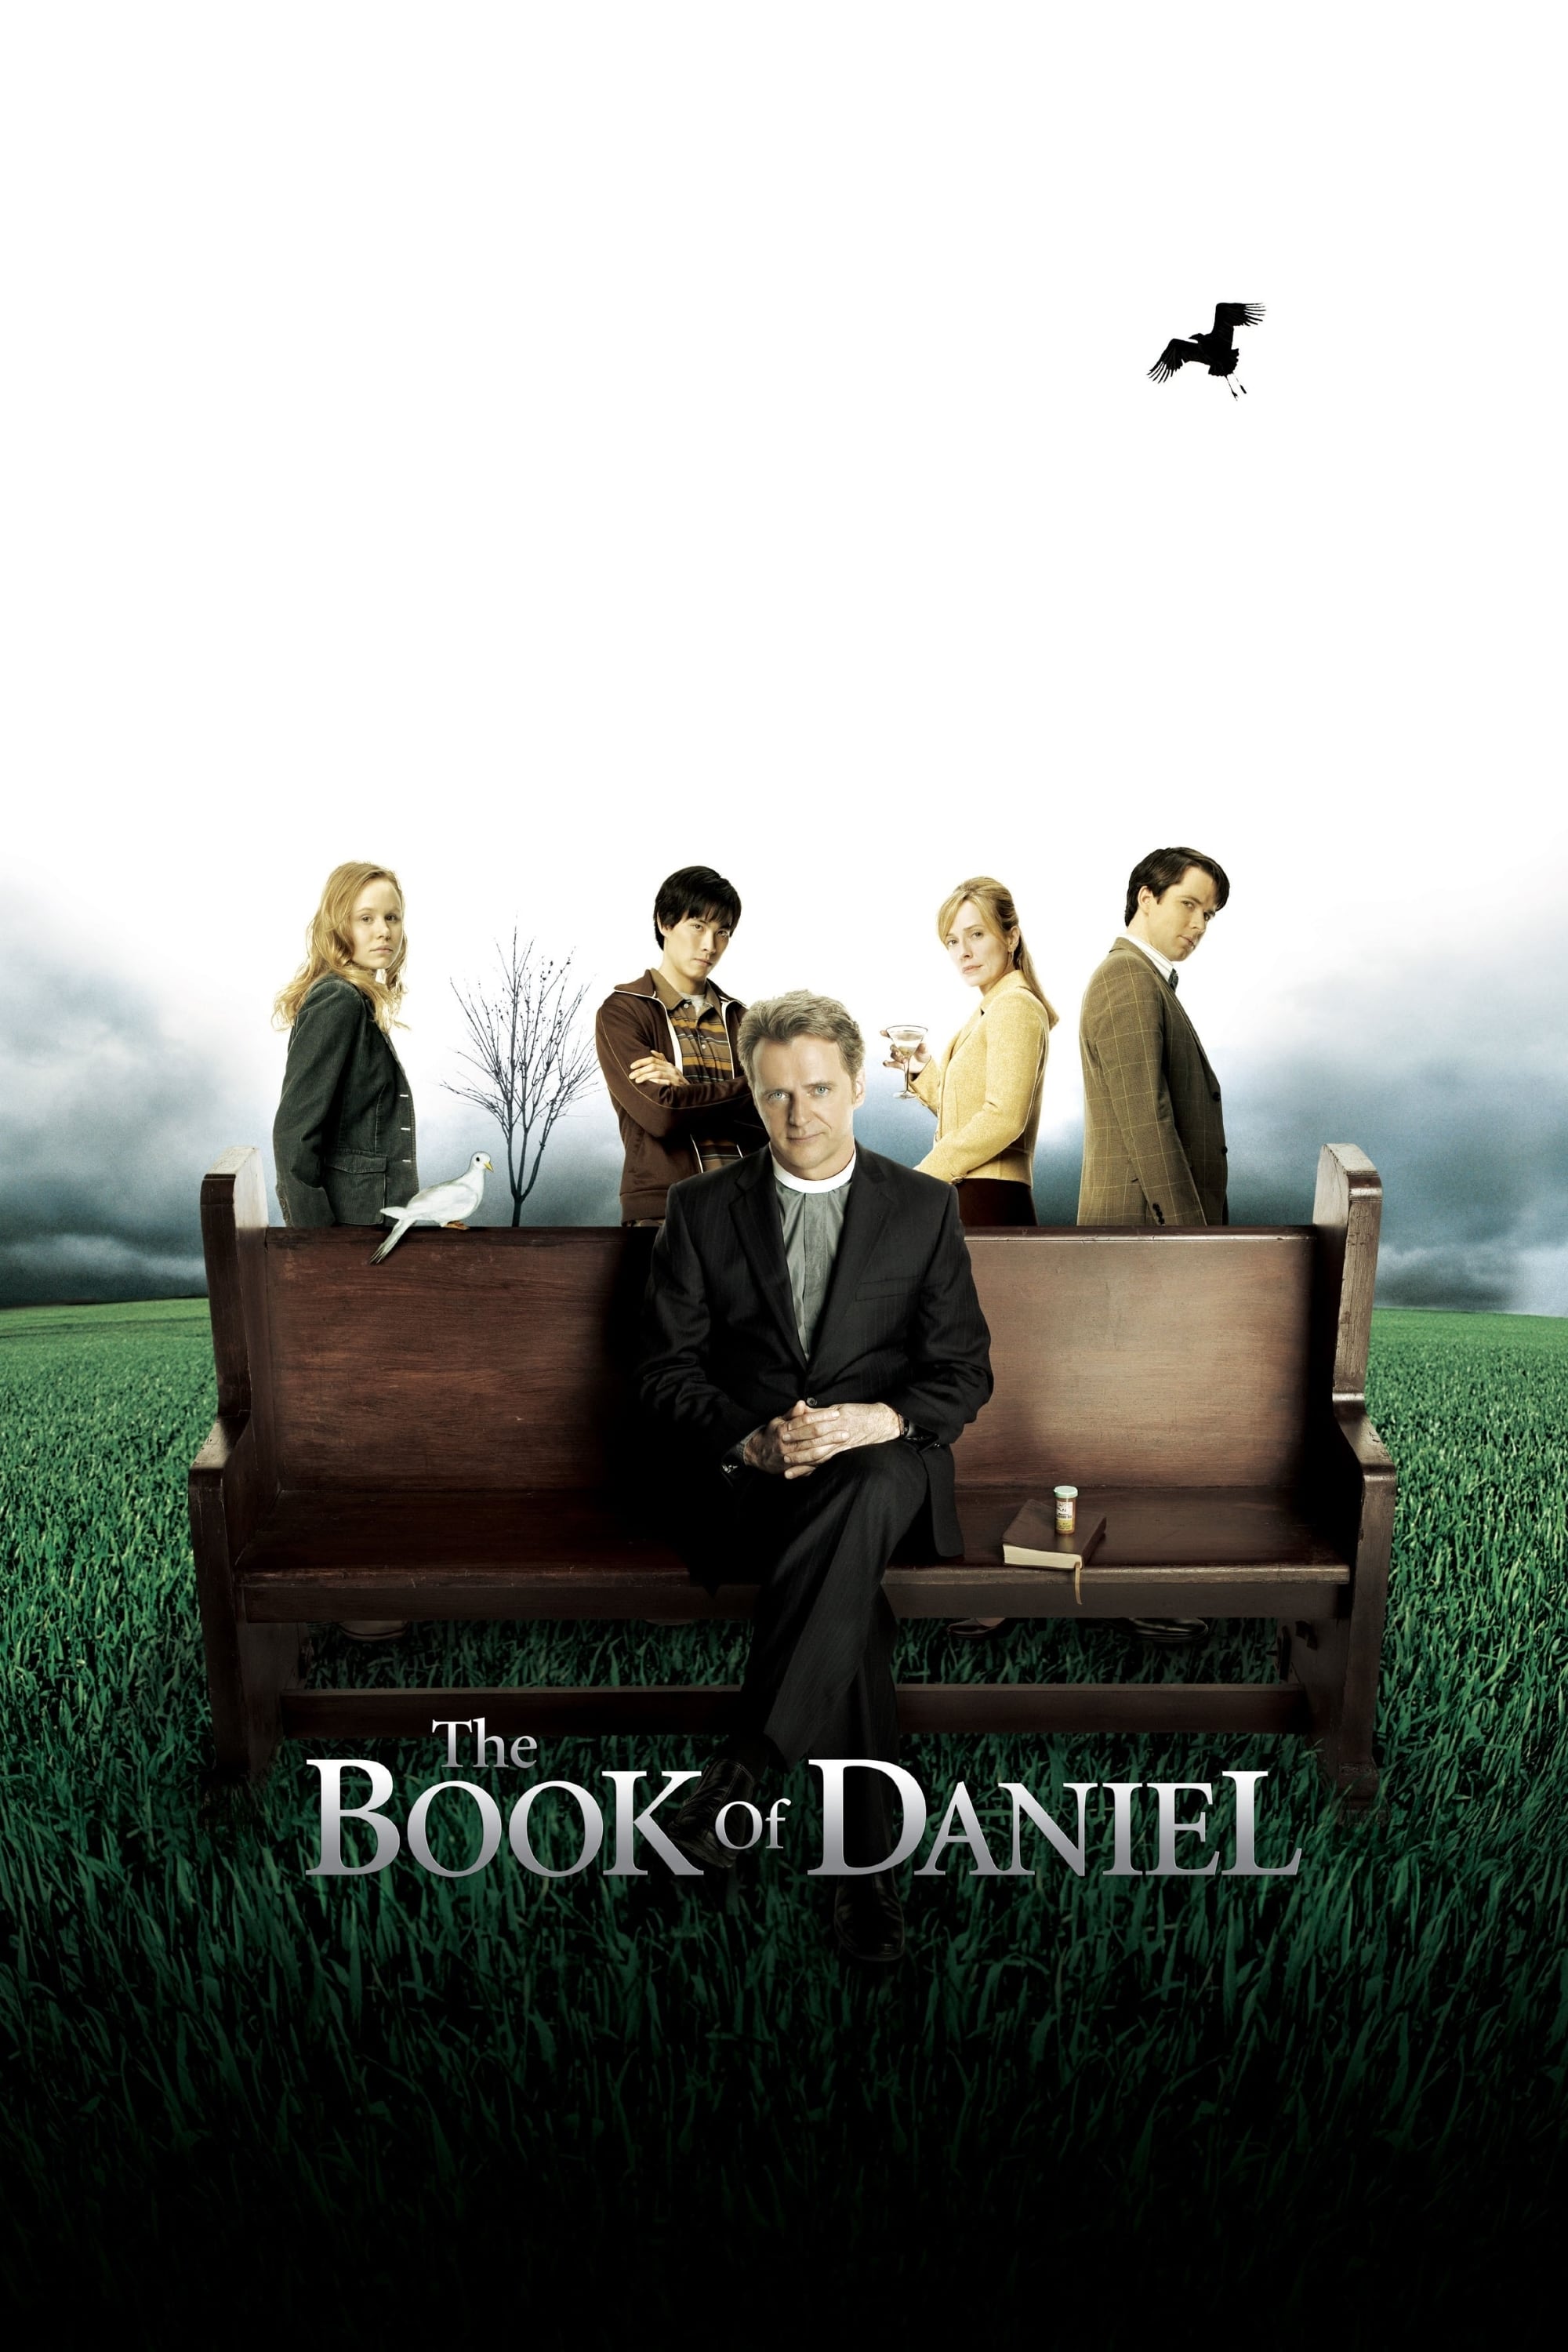 The Book of Daniel TV Shows About Alcoholism